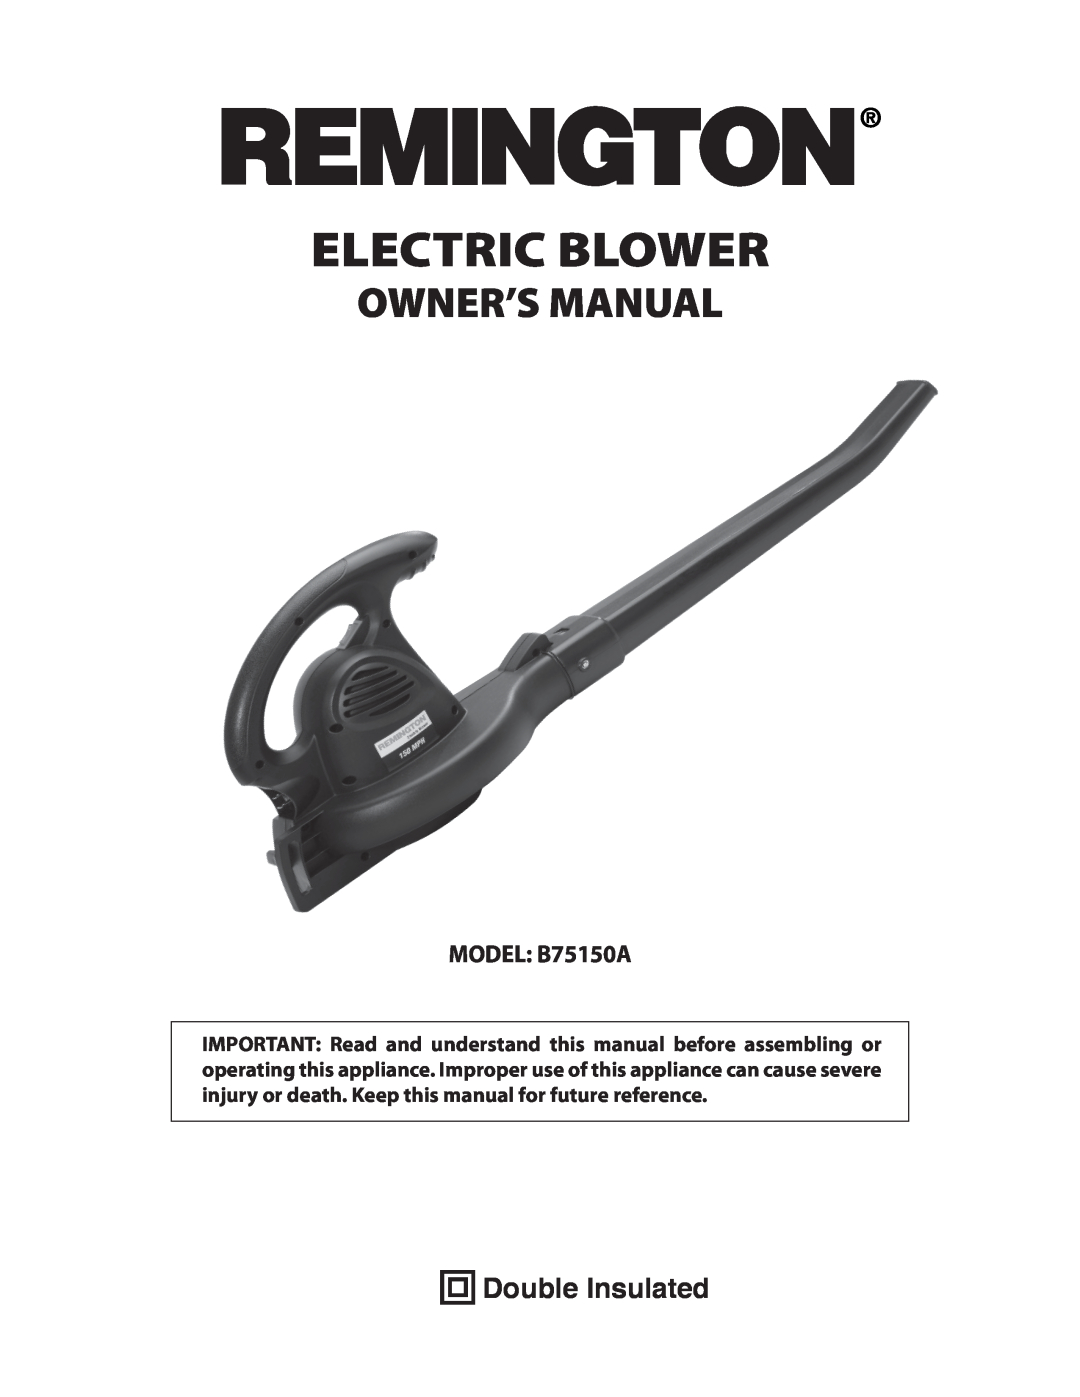 Remington owner manual Electric Blower, Double Insulated, MODEL B75150A 